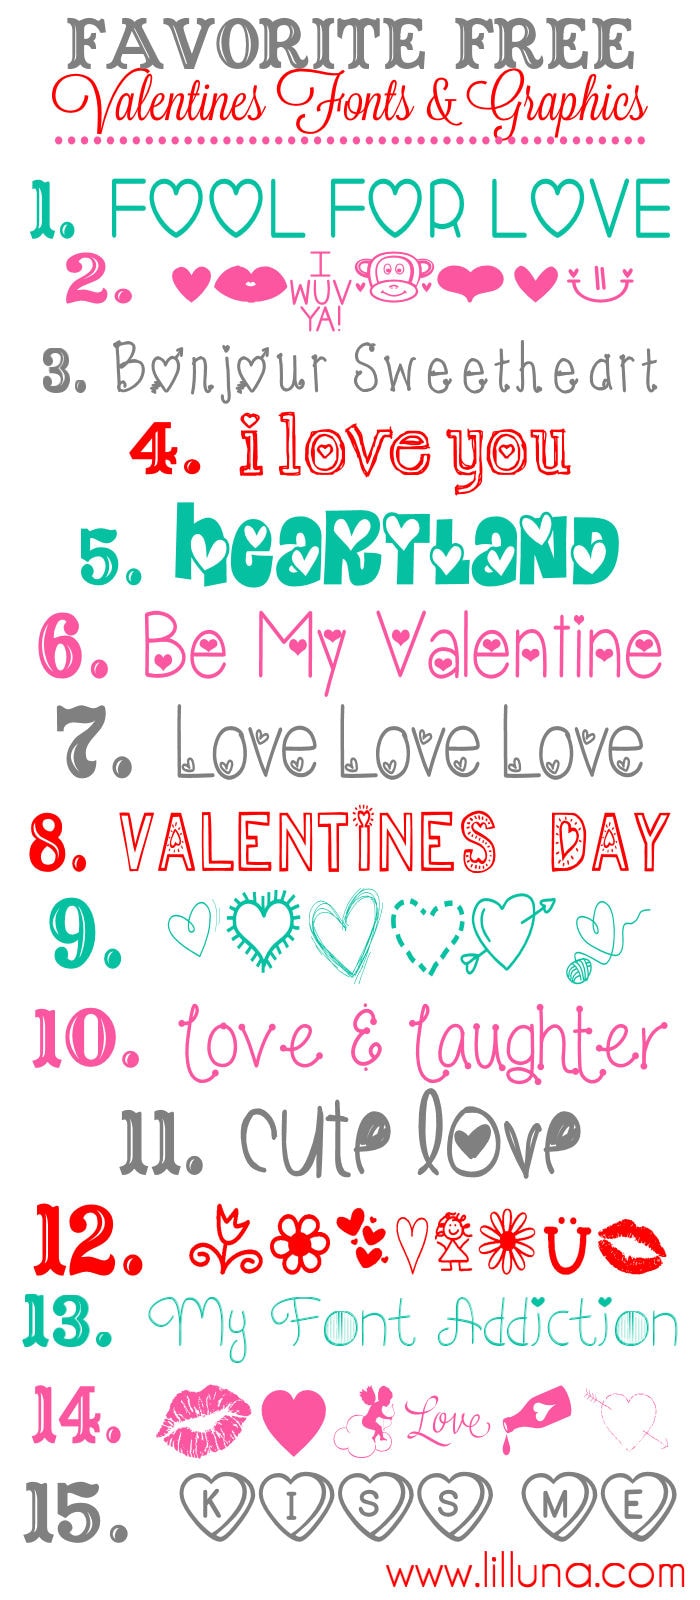 Favorite Free Valentine's Fonts and Graphics to download and use { lilluna.com }